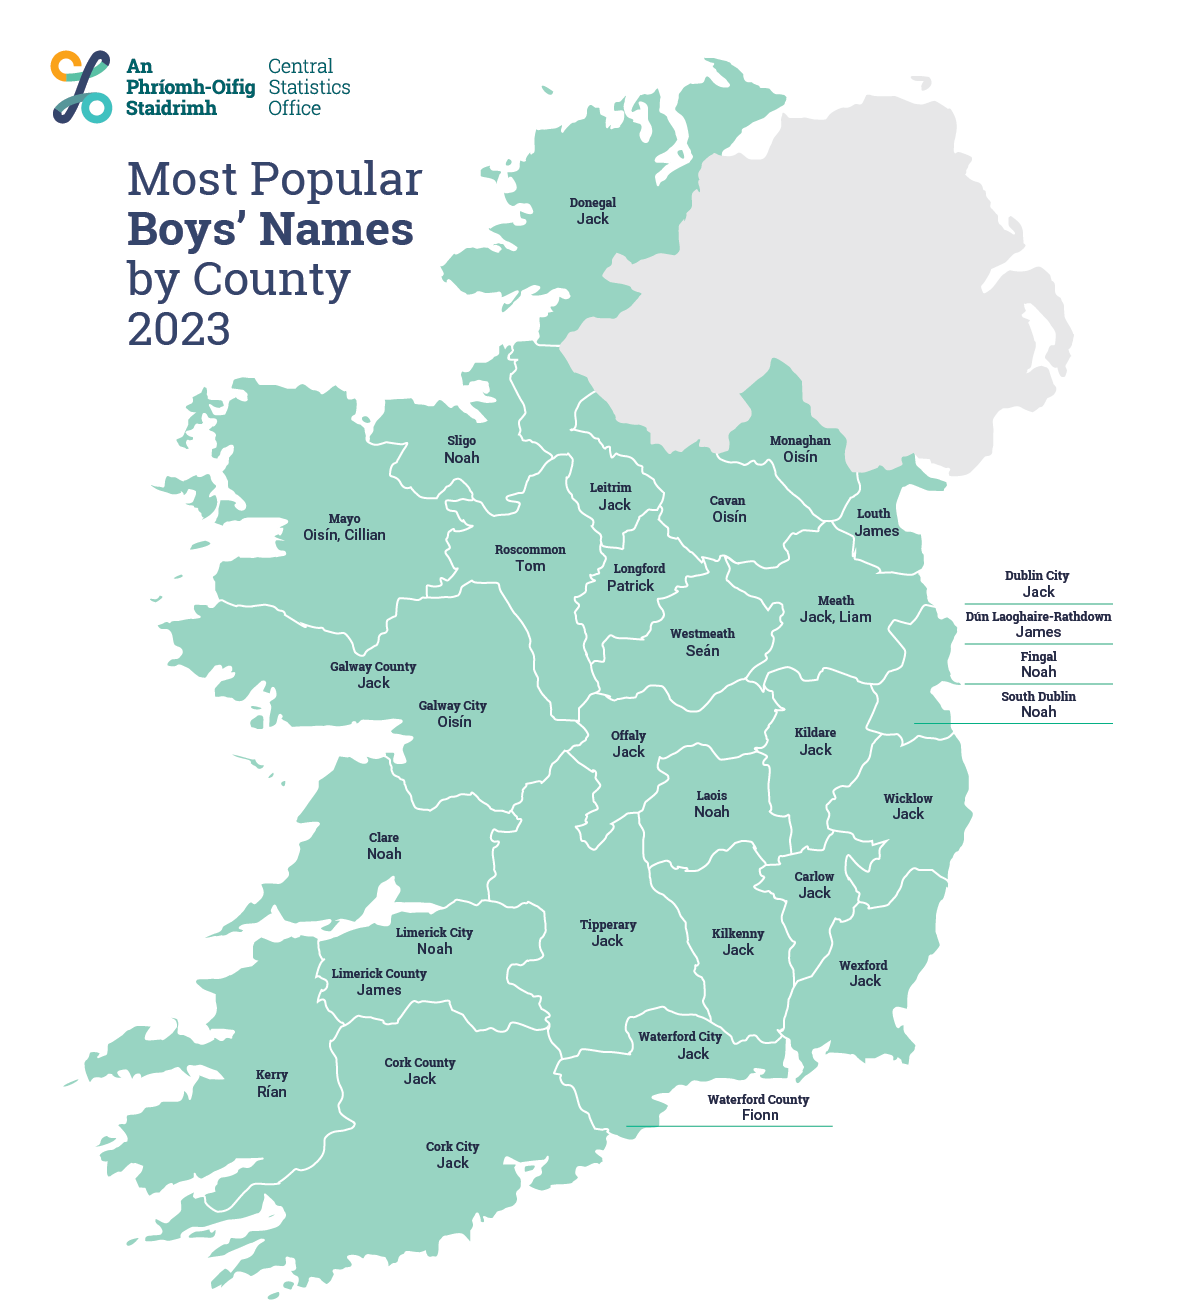 The most popular baby boys’ names in Ireland by county